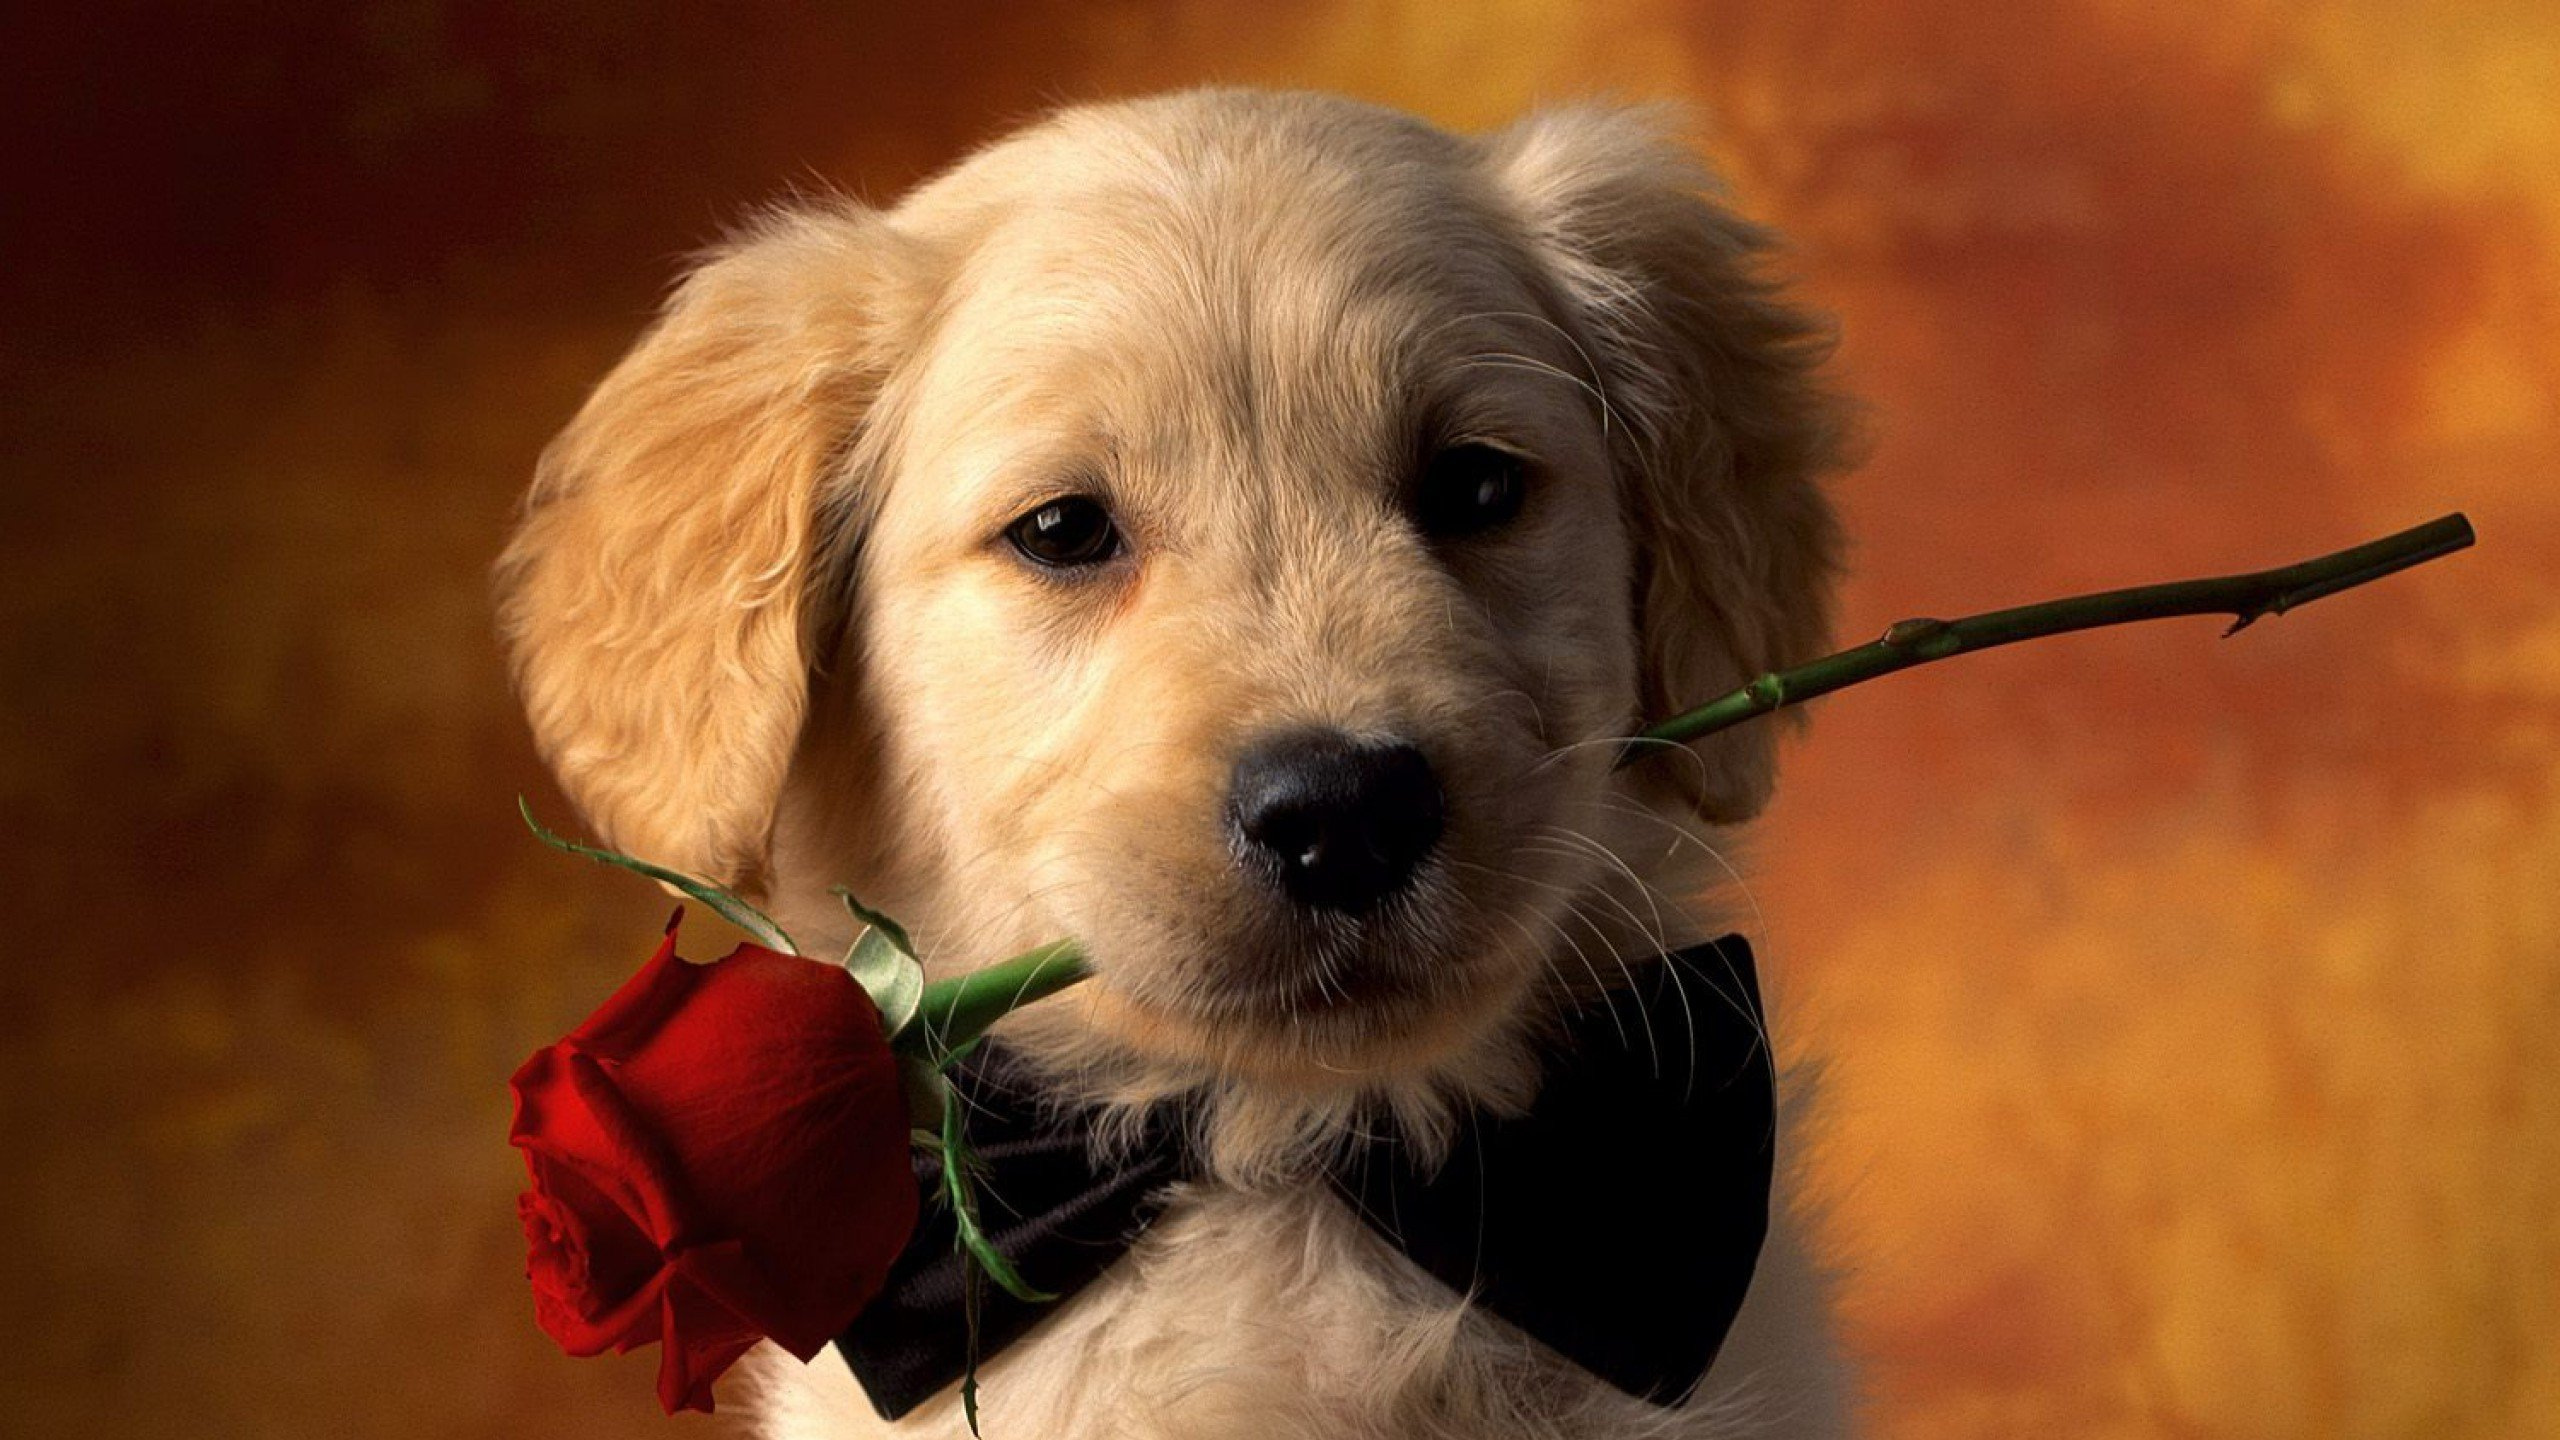 White Short Coated Dog With Red Rose on Head. Wallpaper in 2560x1440 Resolution